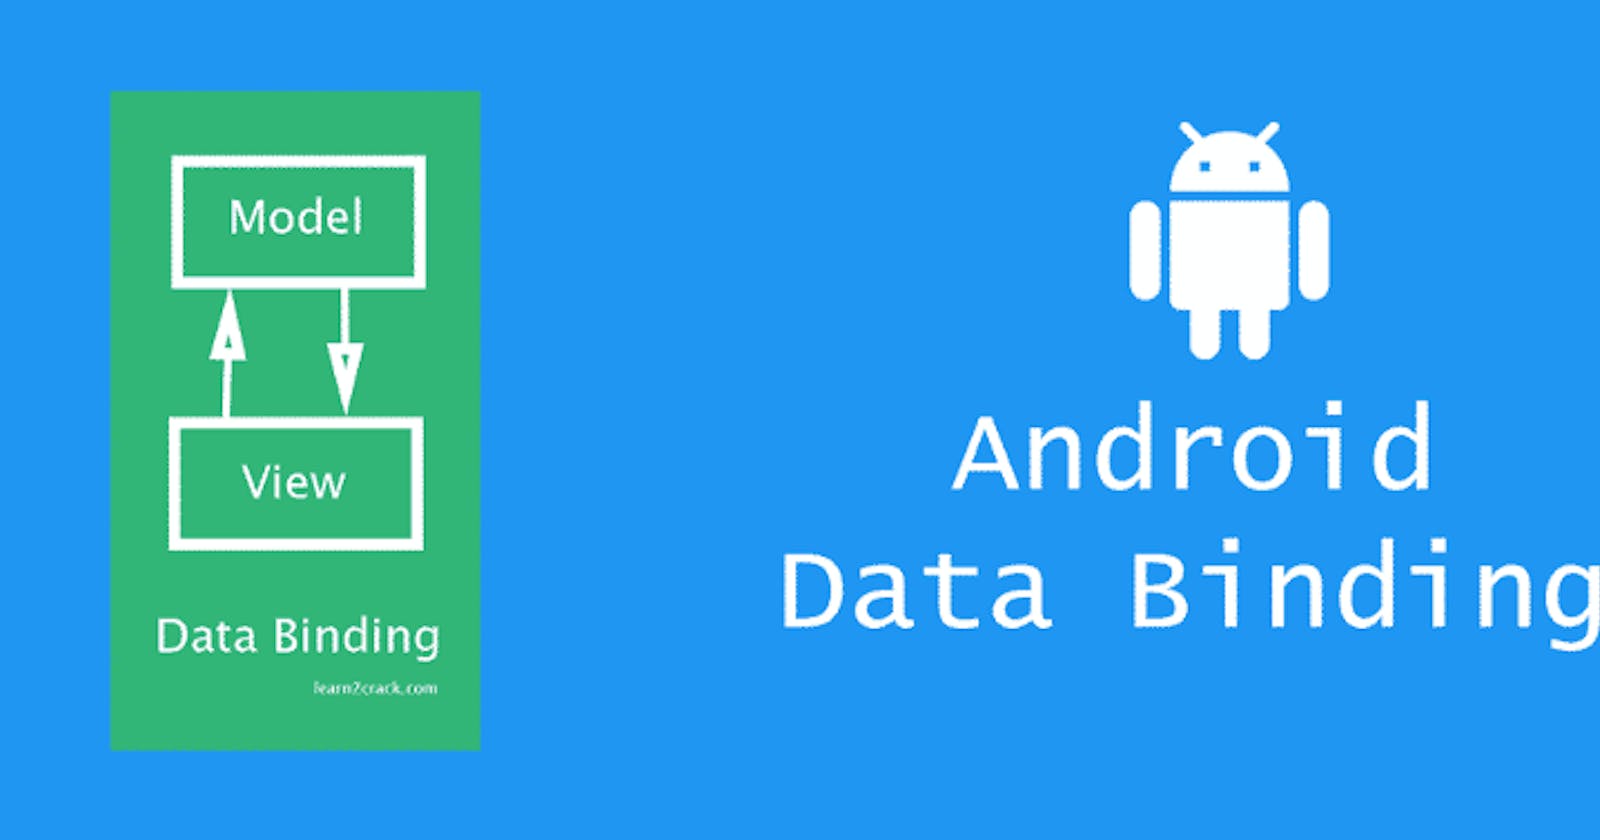 Data Binding vs Find Views by ID